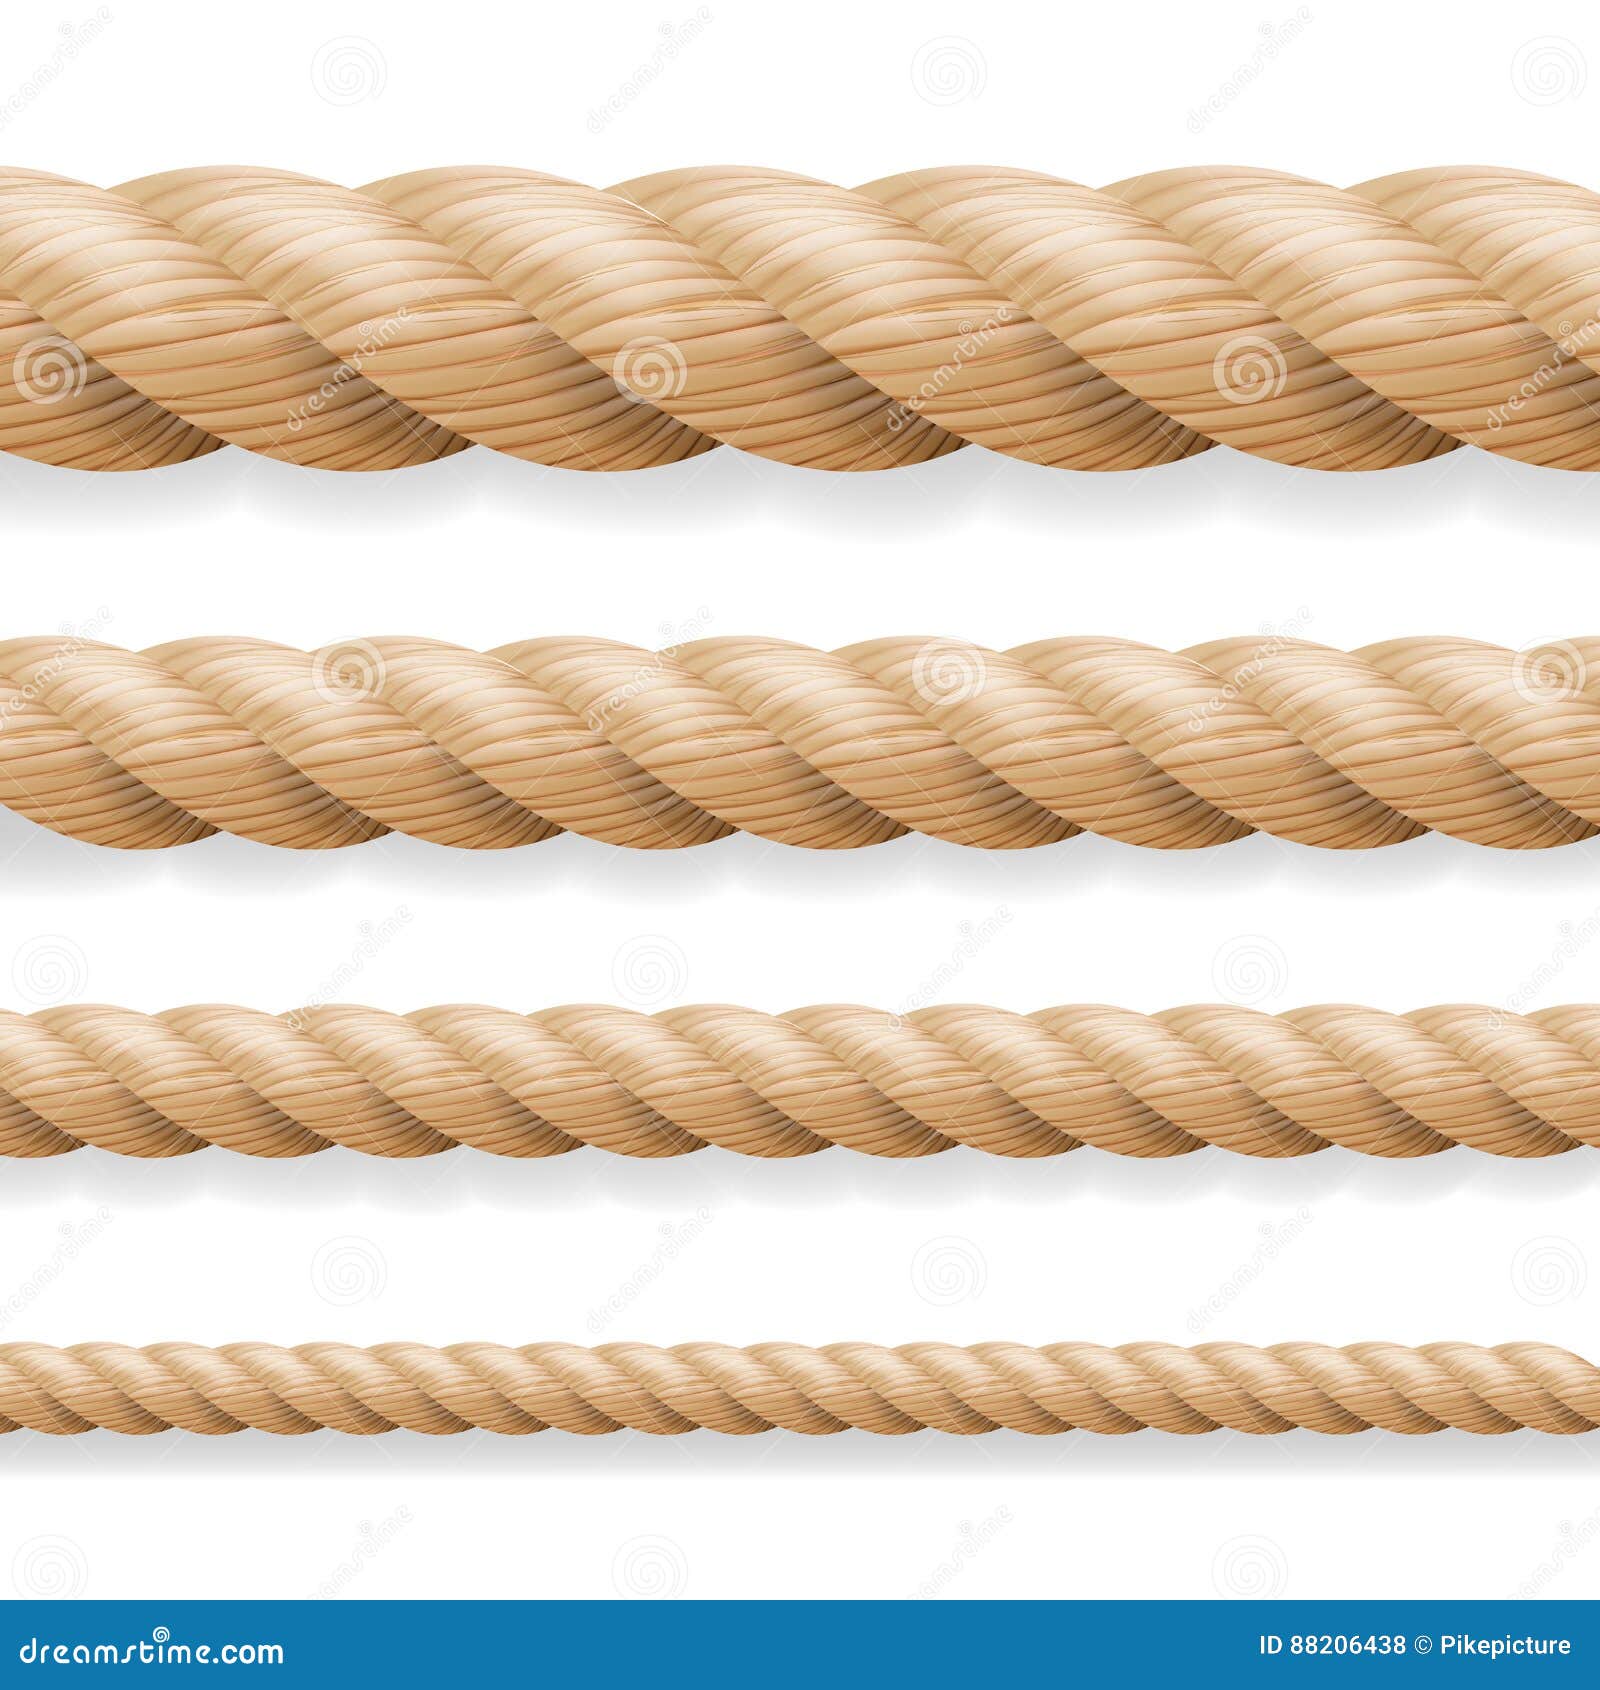 https://thumbs.dreamstime.com/z/realistic-rope-vector-different-thickness-rope-set-isolated-white-background-illustration-twisted-nautical-thick-lines-gr-88206438.jpg